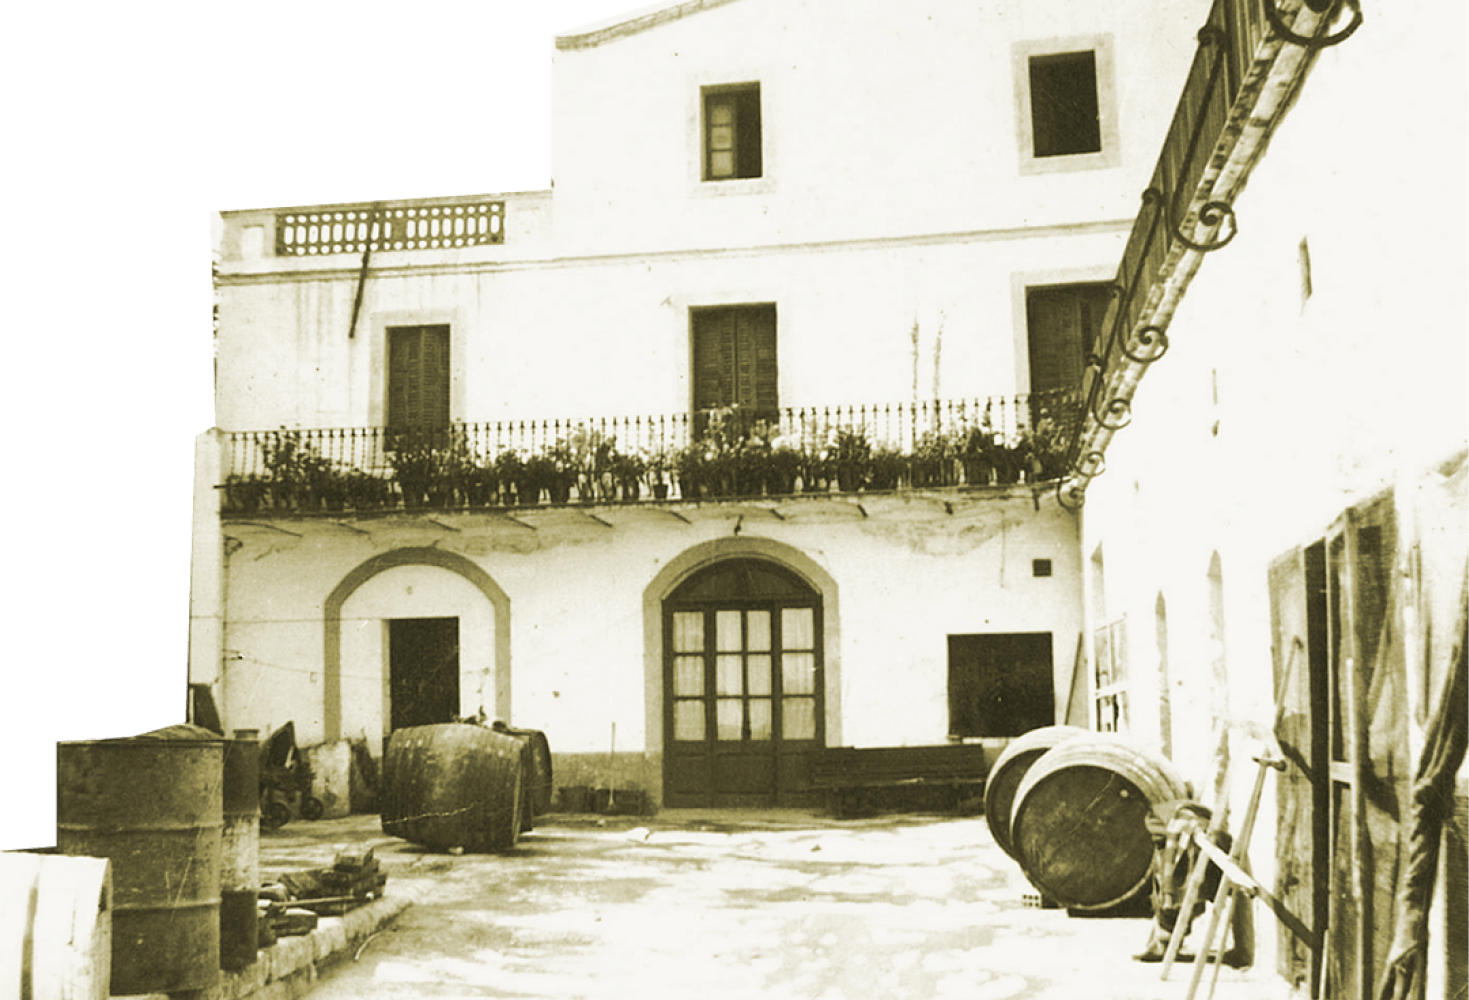 Early Freixenet headquarters, a white colonial style building with wine barrels in front.